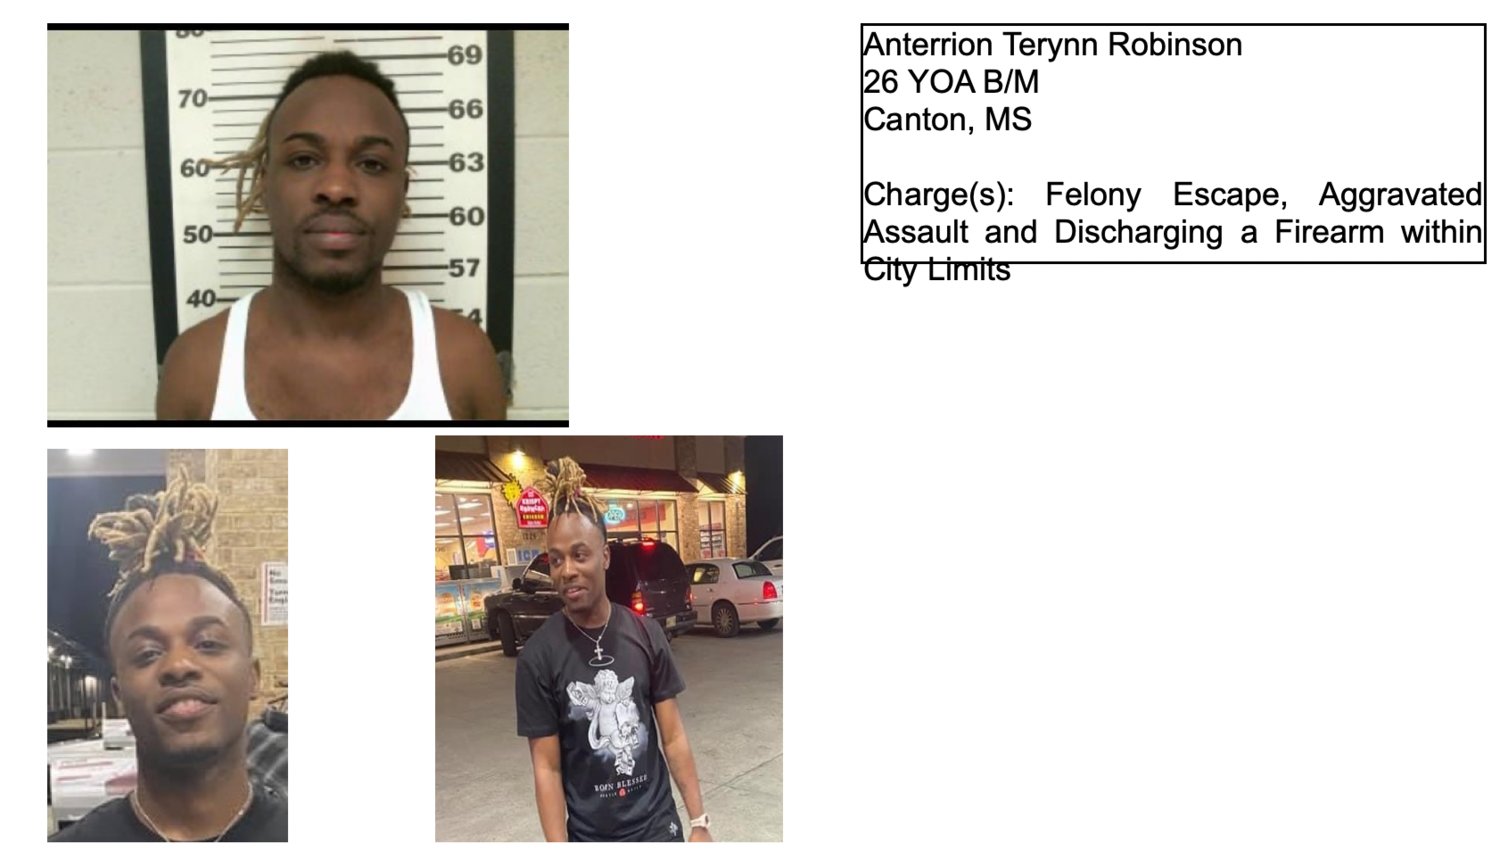 Pictures and information authorities released on Robinson while he was at large.